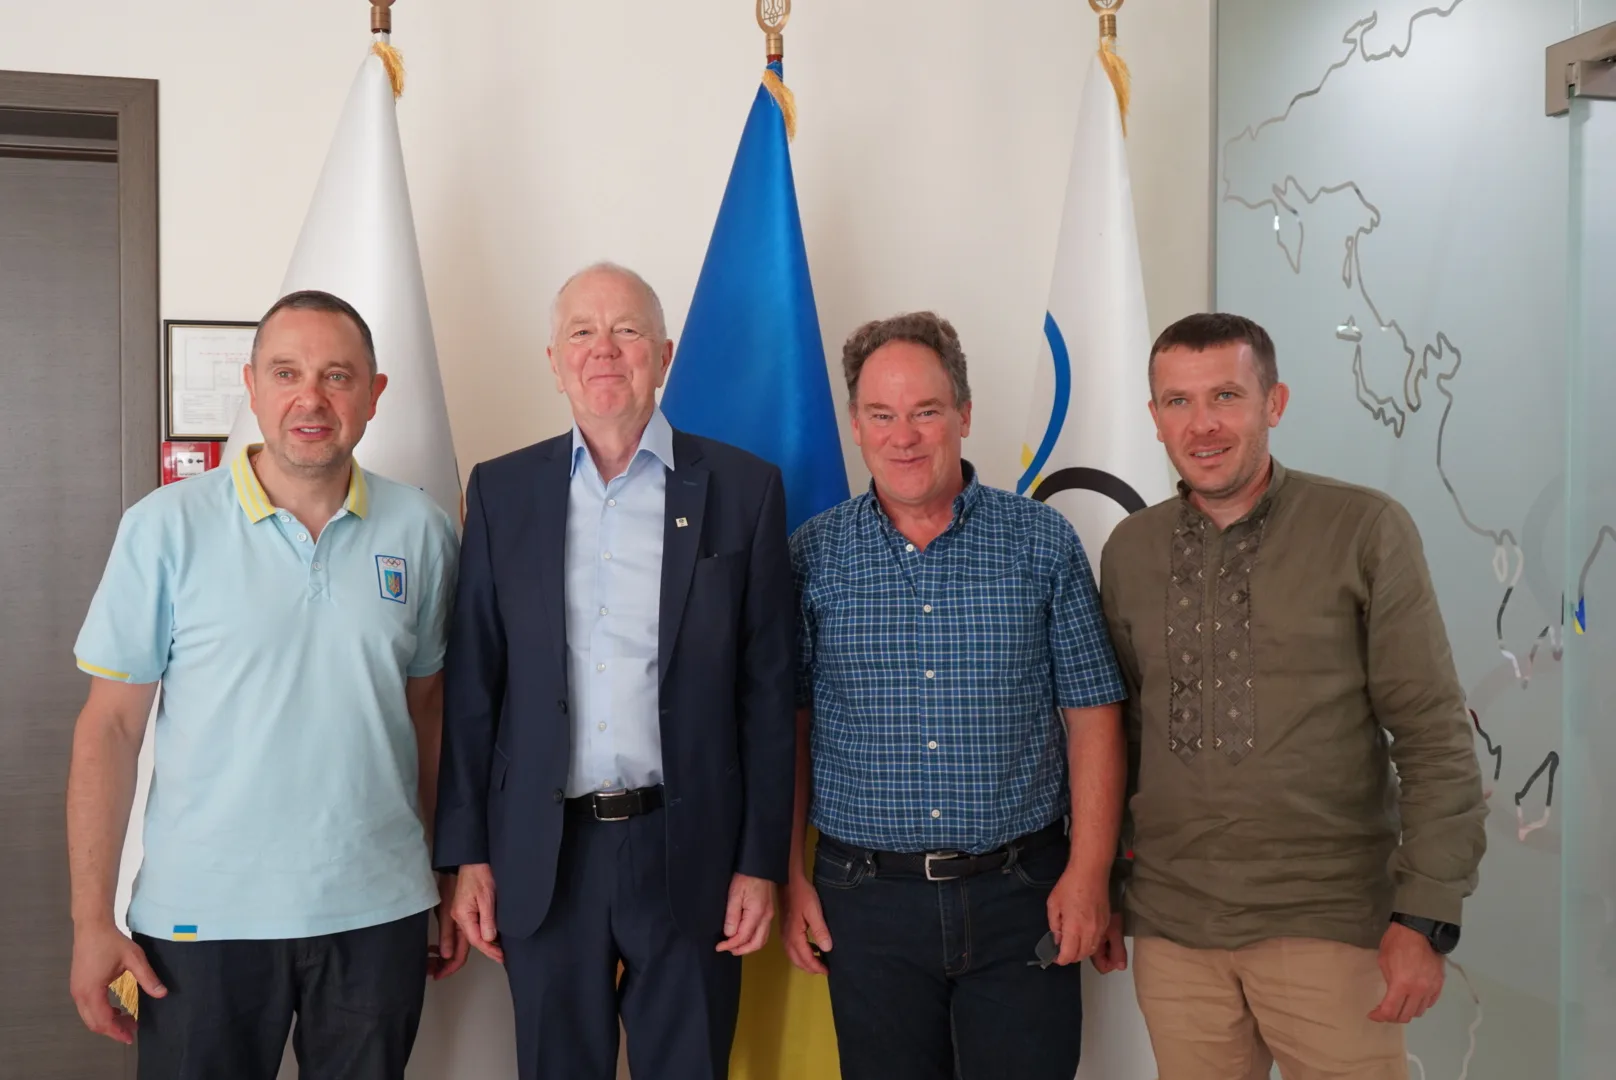 IBU President Olle Dahlin, second left, joined secretary general Max Cobb, second right, on the trip to Ukraine where they were hosted by Vadym Guttsait, left, the country's Sports Minister, and Ivan Krulko, right, head of the Ukraine Biathlon Federation ©IBU